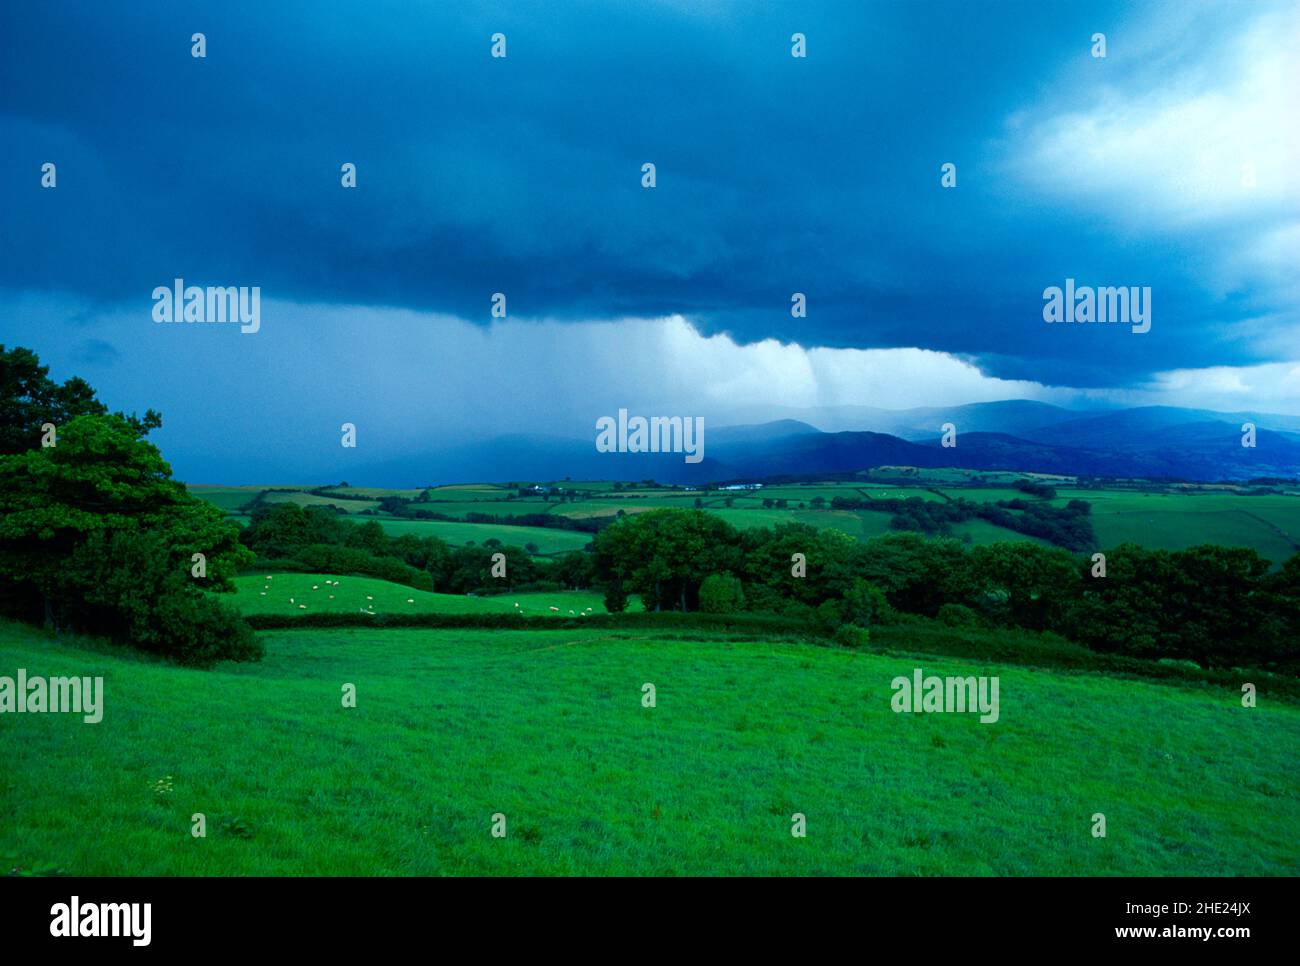 UK, Wales, Snowdonia, storm clouds over landscape, Stock Photo